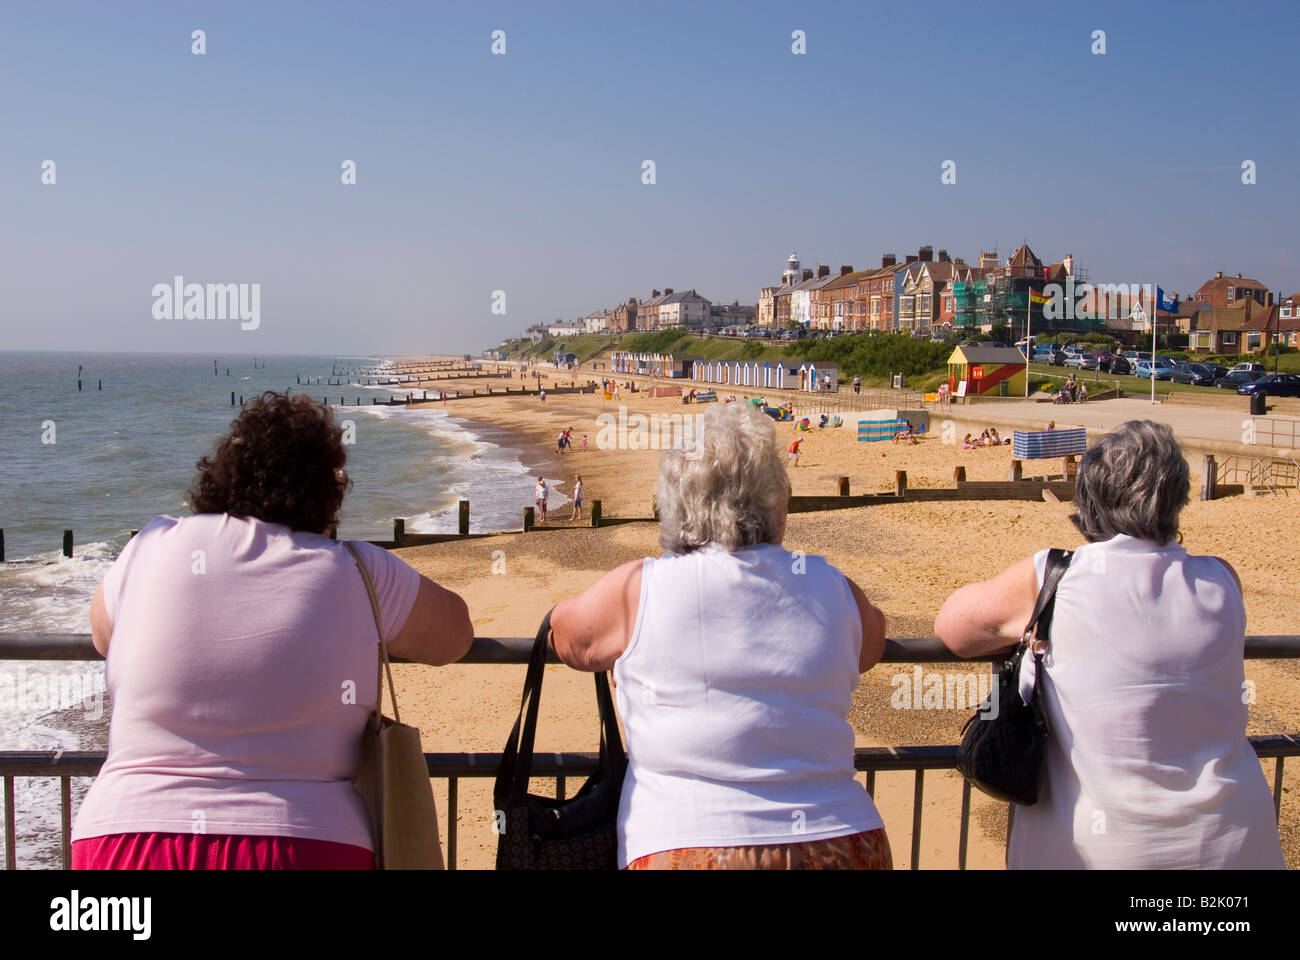 People On Southwold Pier Look Out Over Beach On A Hot Summers Day in the uk Stock Photo